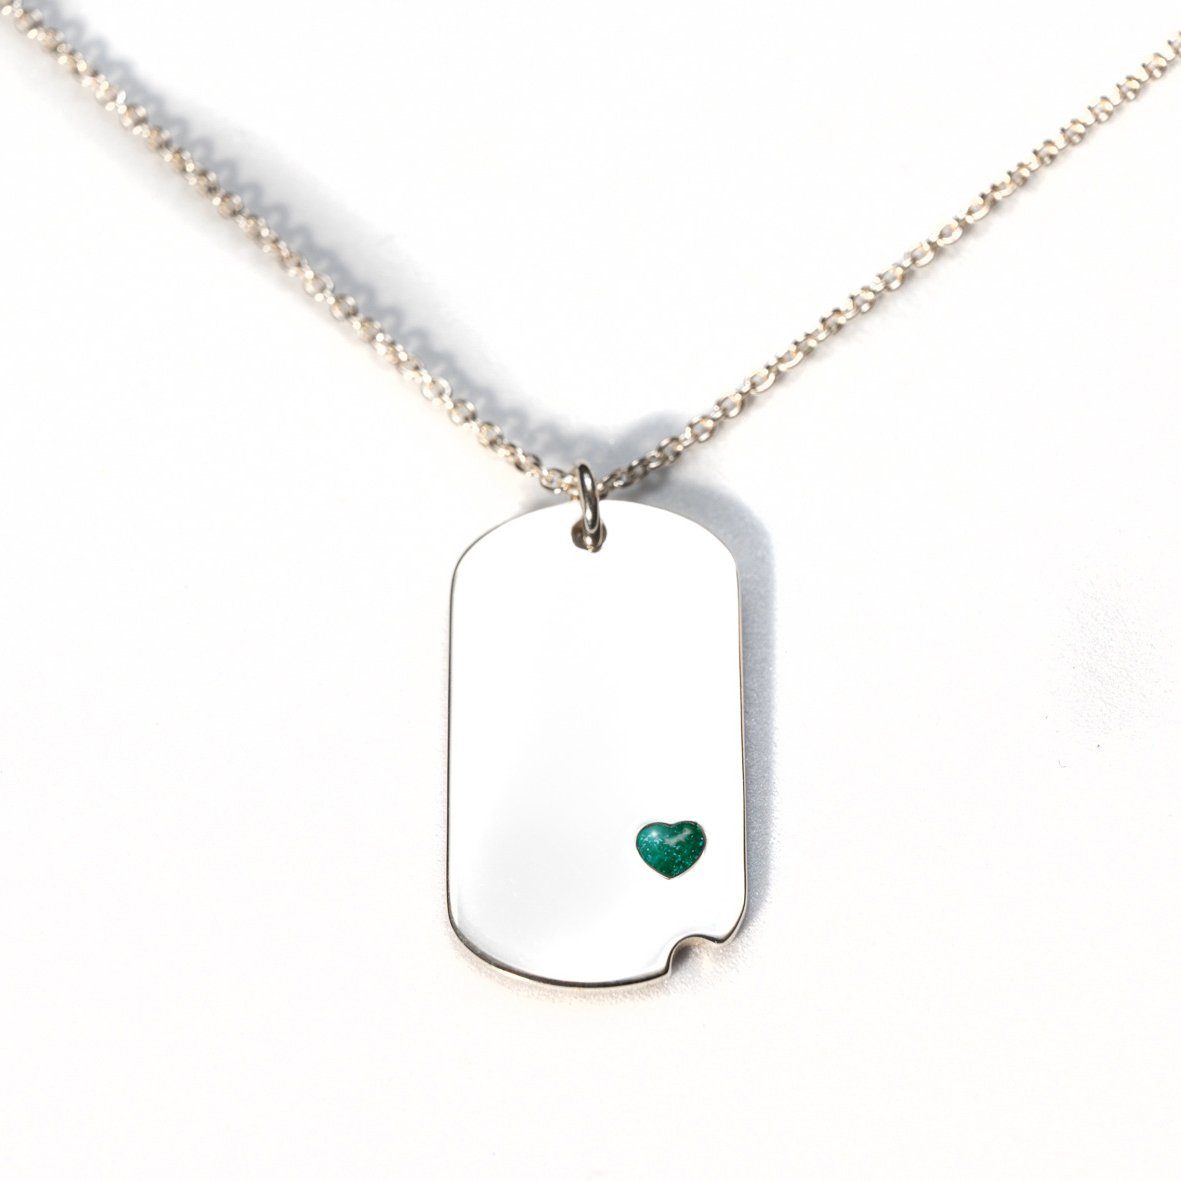 Sterling-Silver Dog Tag with Everence Inlay - Small Everence Emerald 